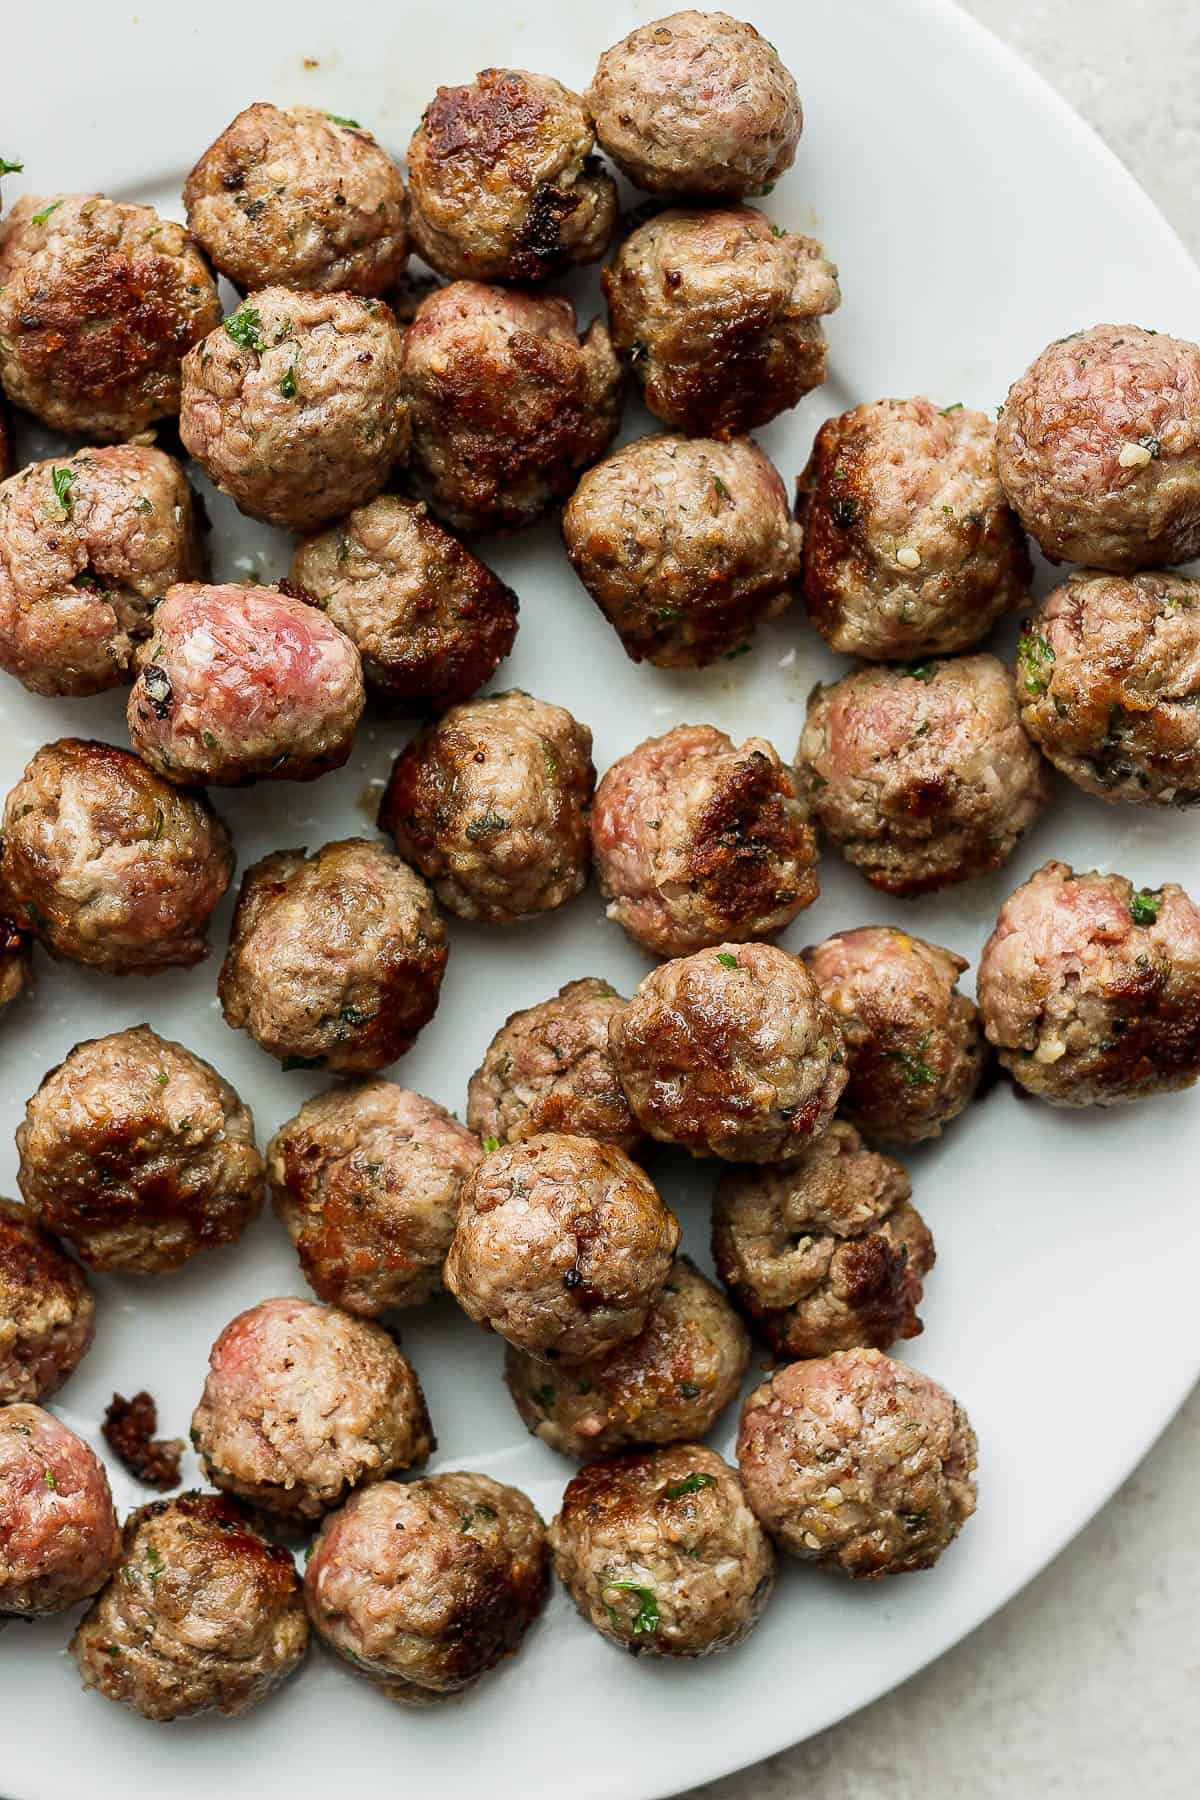 Seared meatballs on a white plate.